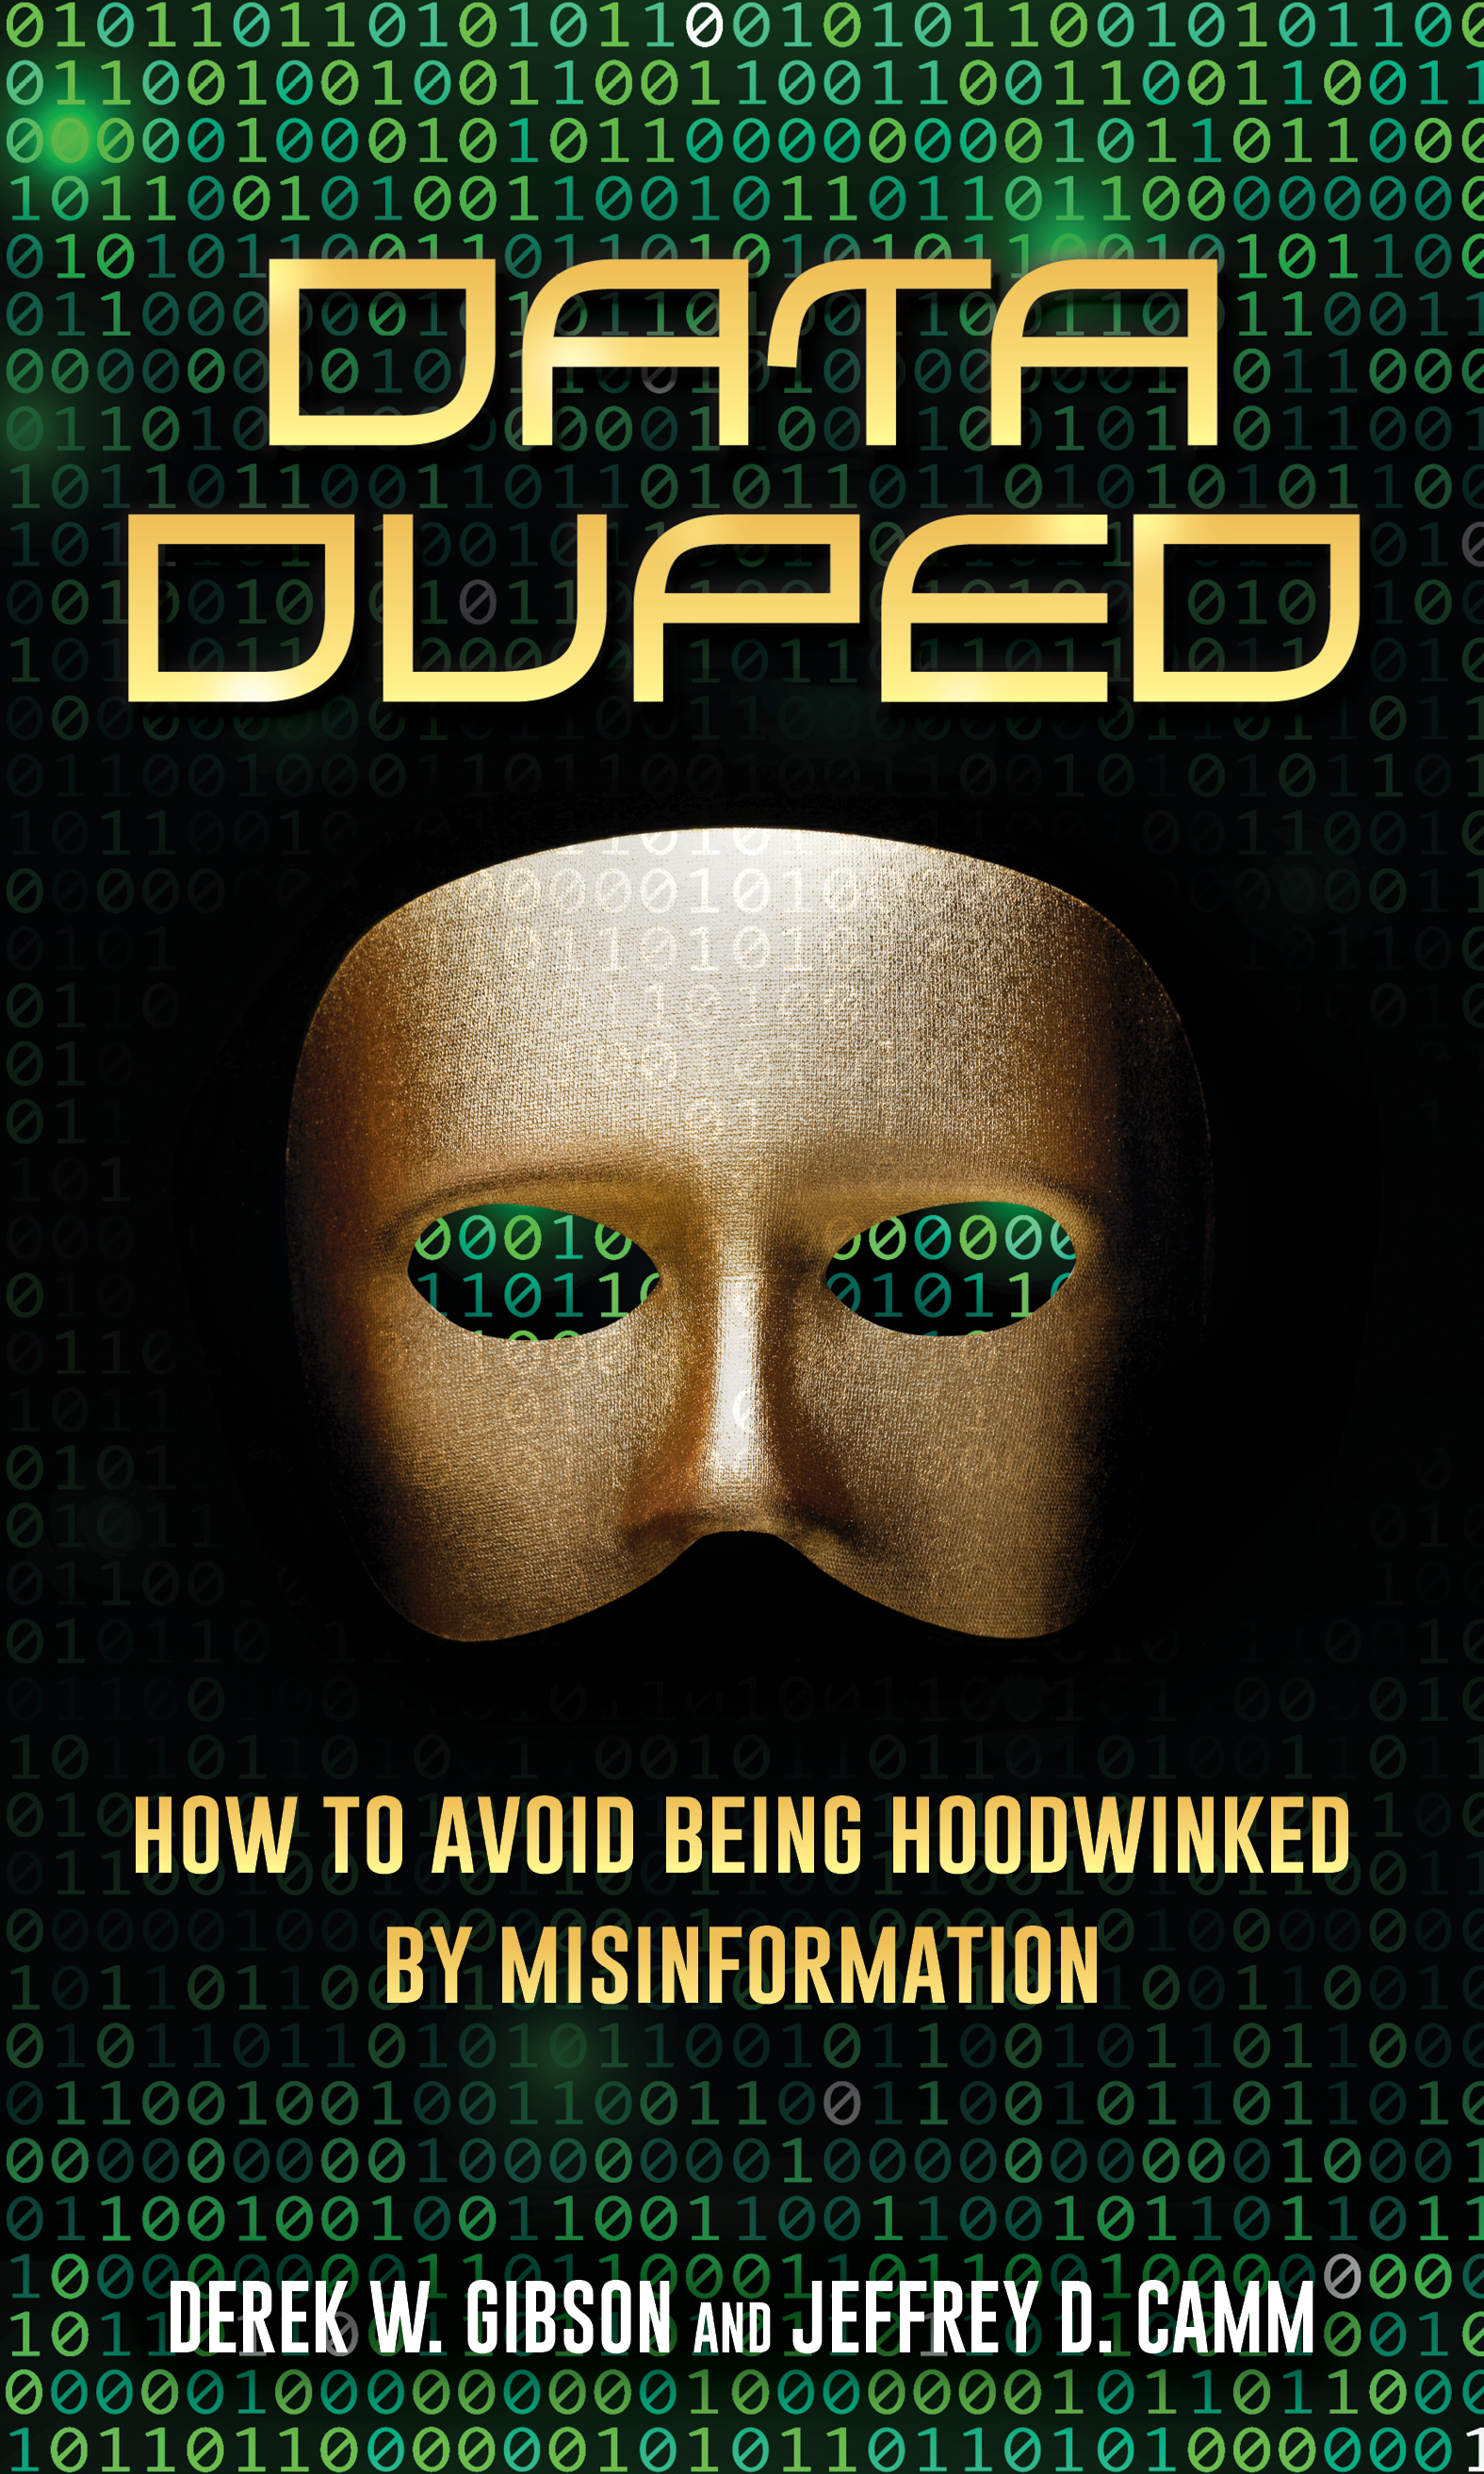 Data Duped: How to Avoid Being Hoodwinked by Misinformation